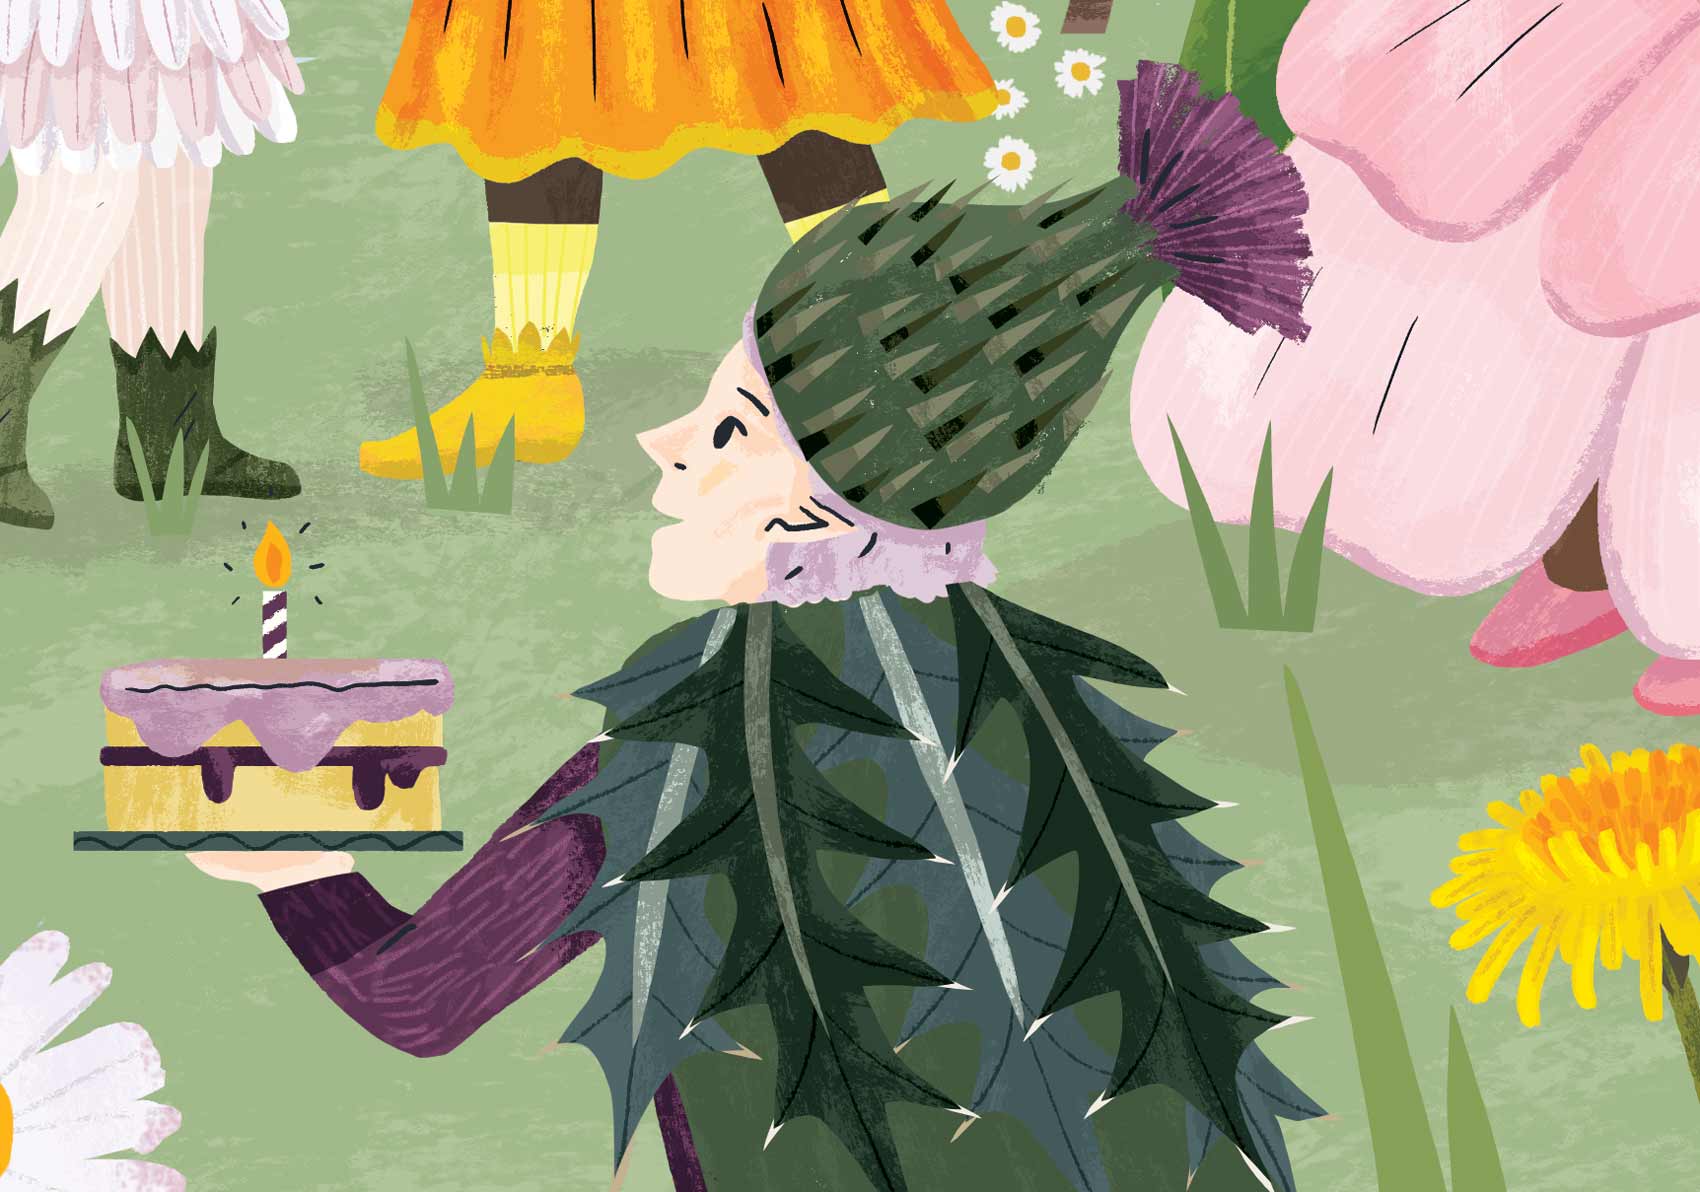 From Foraging: The complete guide for kids and families, illustrated by Elly Jahnz